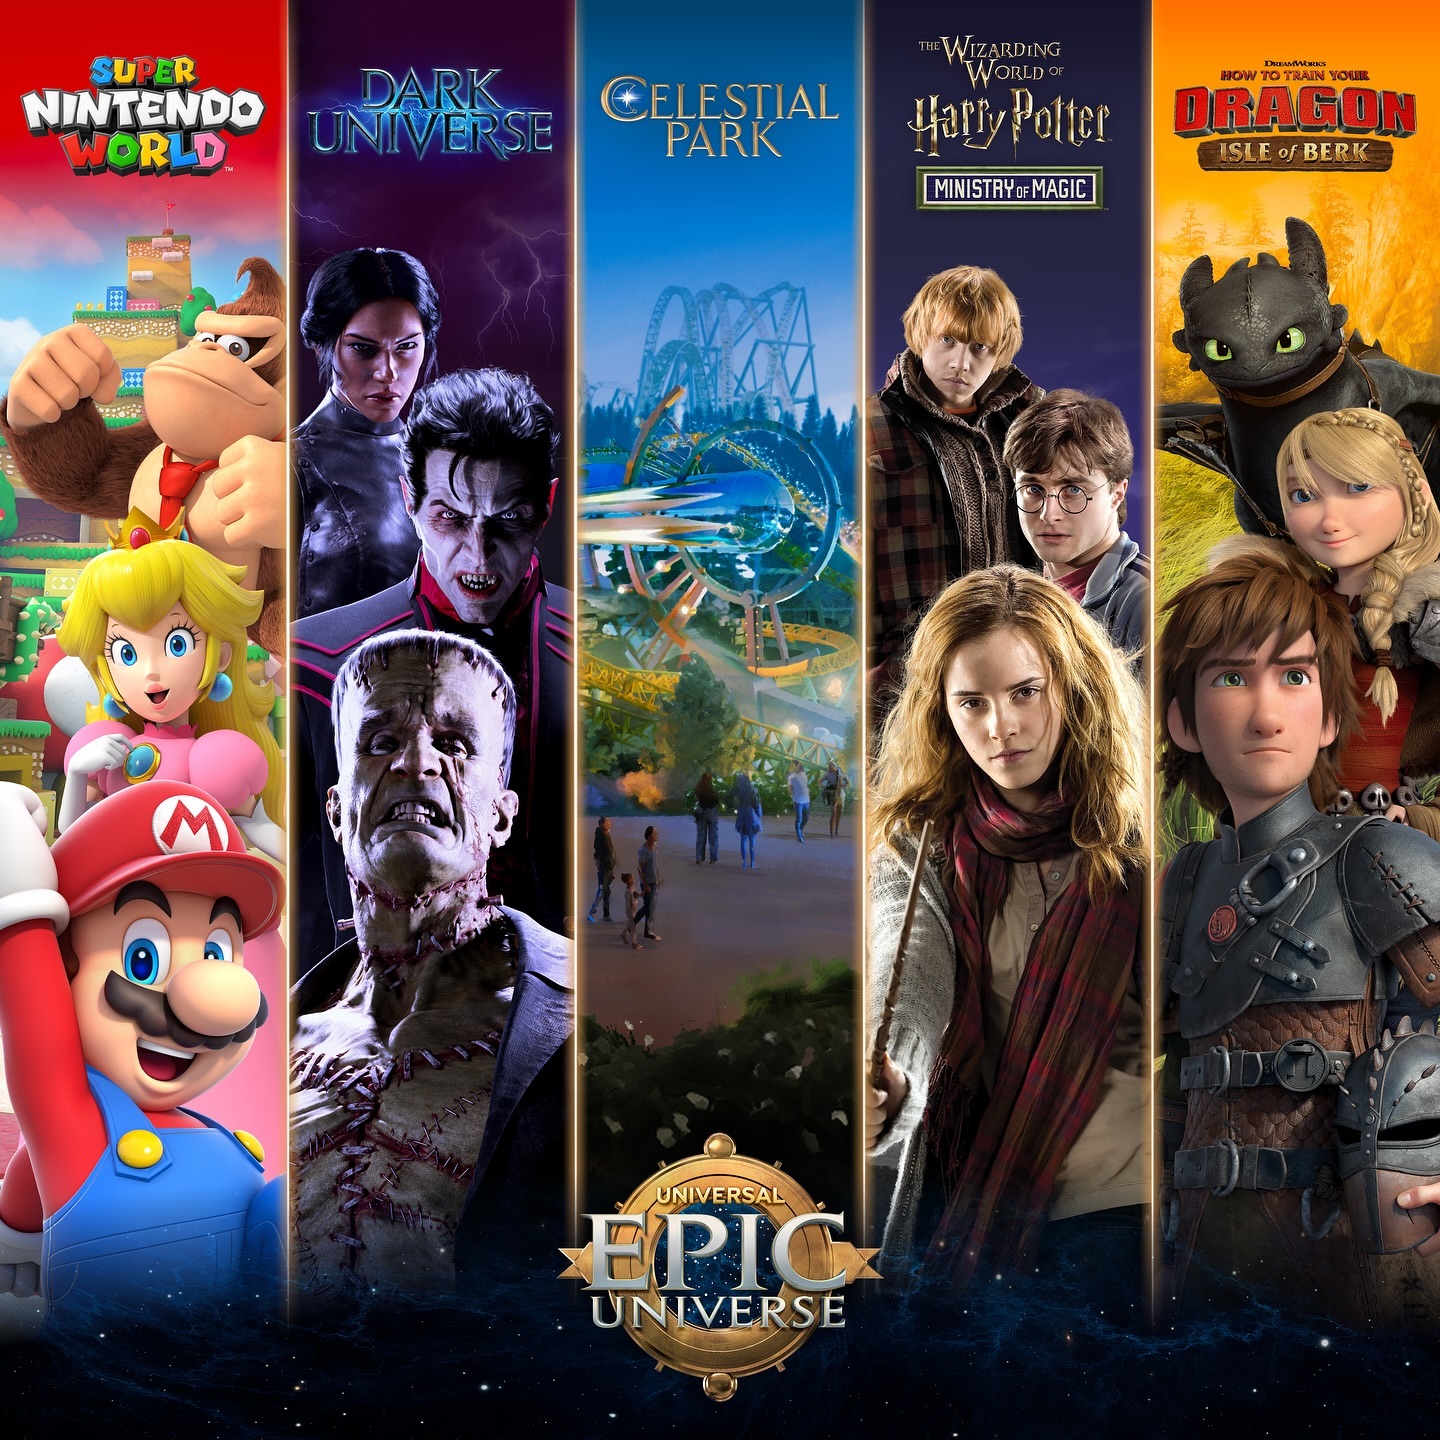 Who is ready to visit the new Universal Epic Universe park in Orlando next year?! 🤩

JUST ANNOUNCED: Five immersive worl